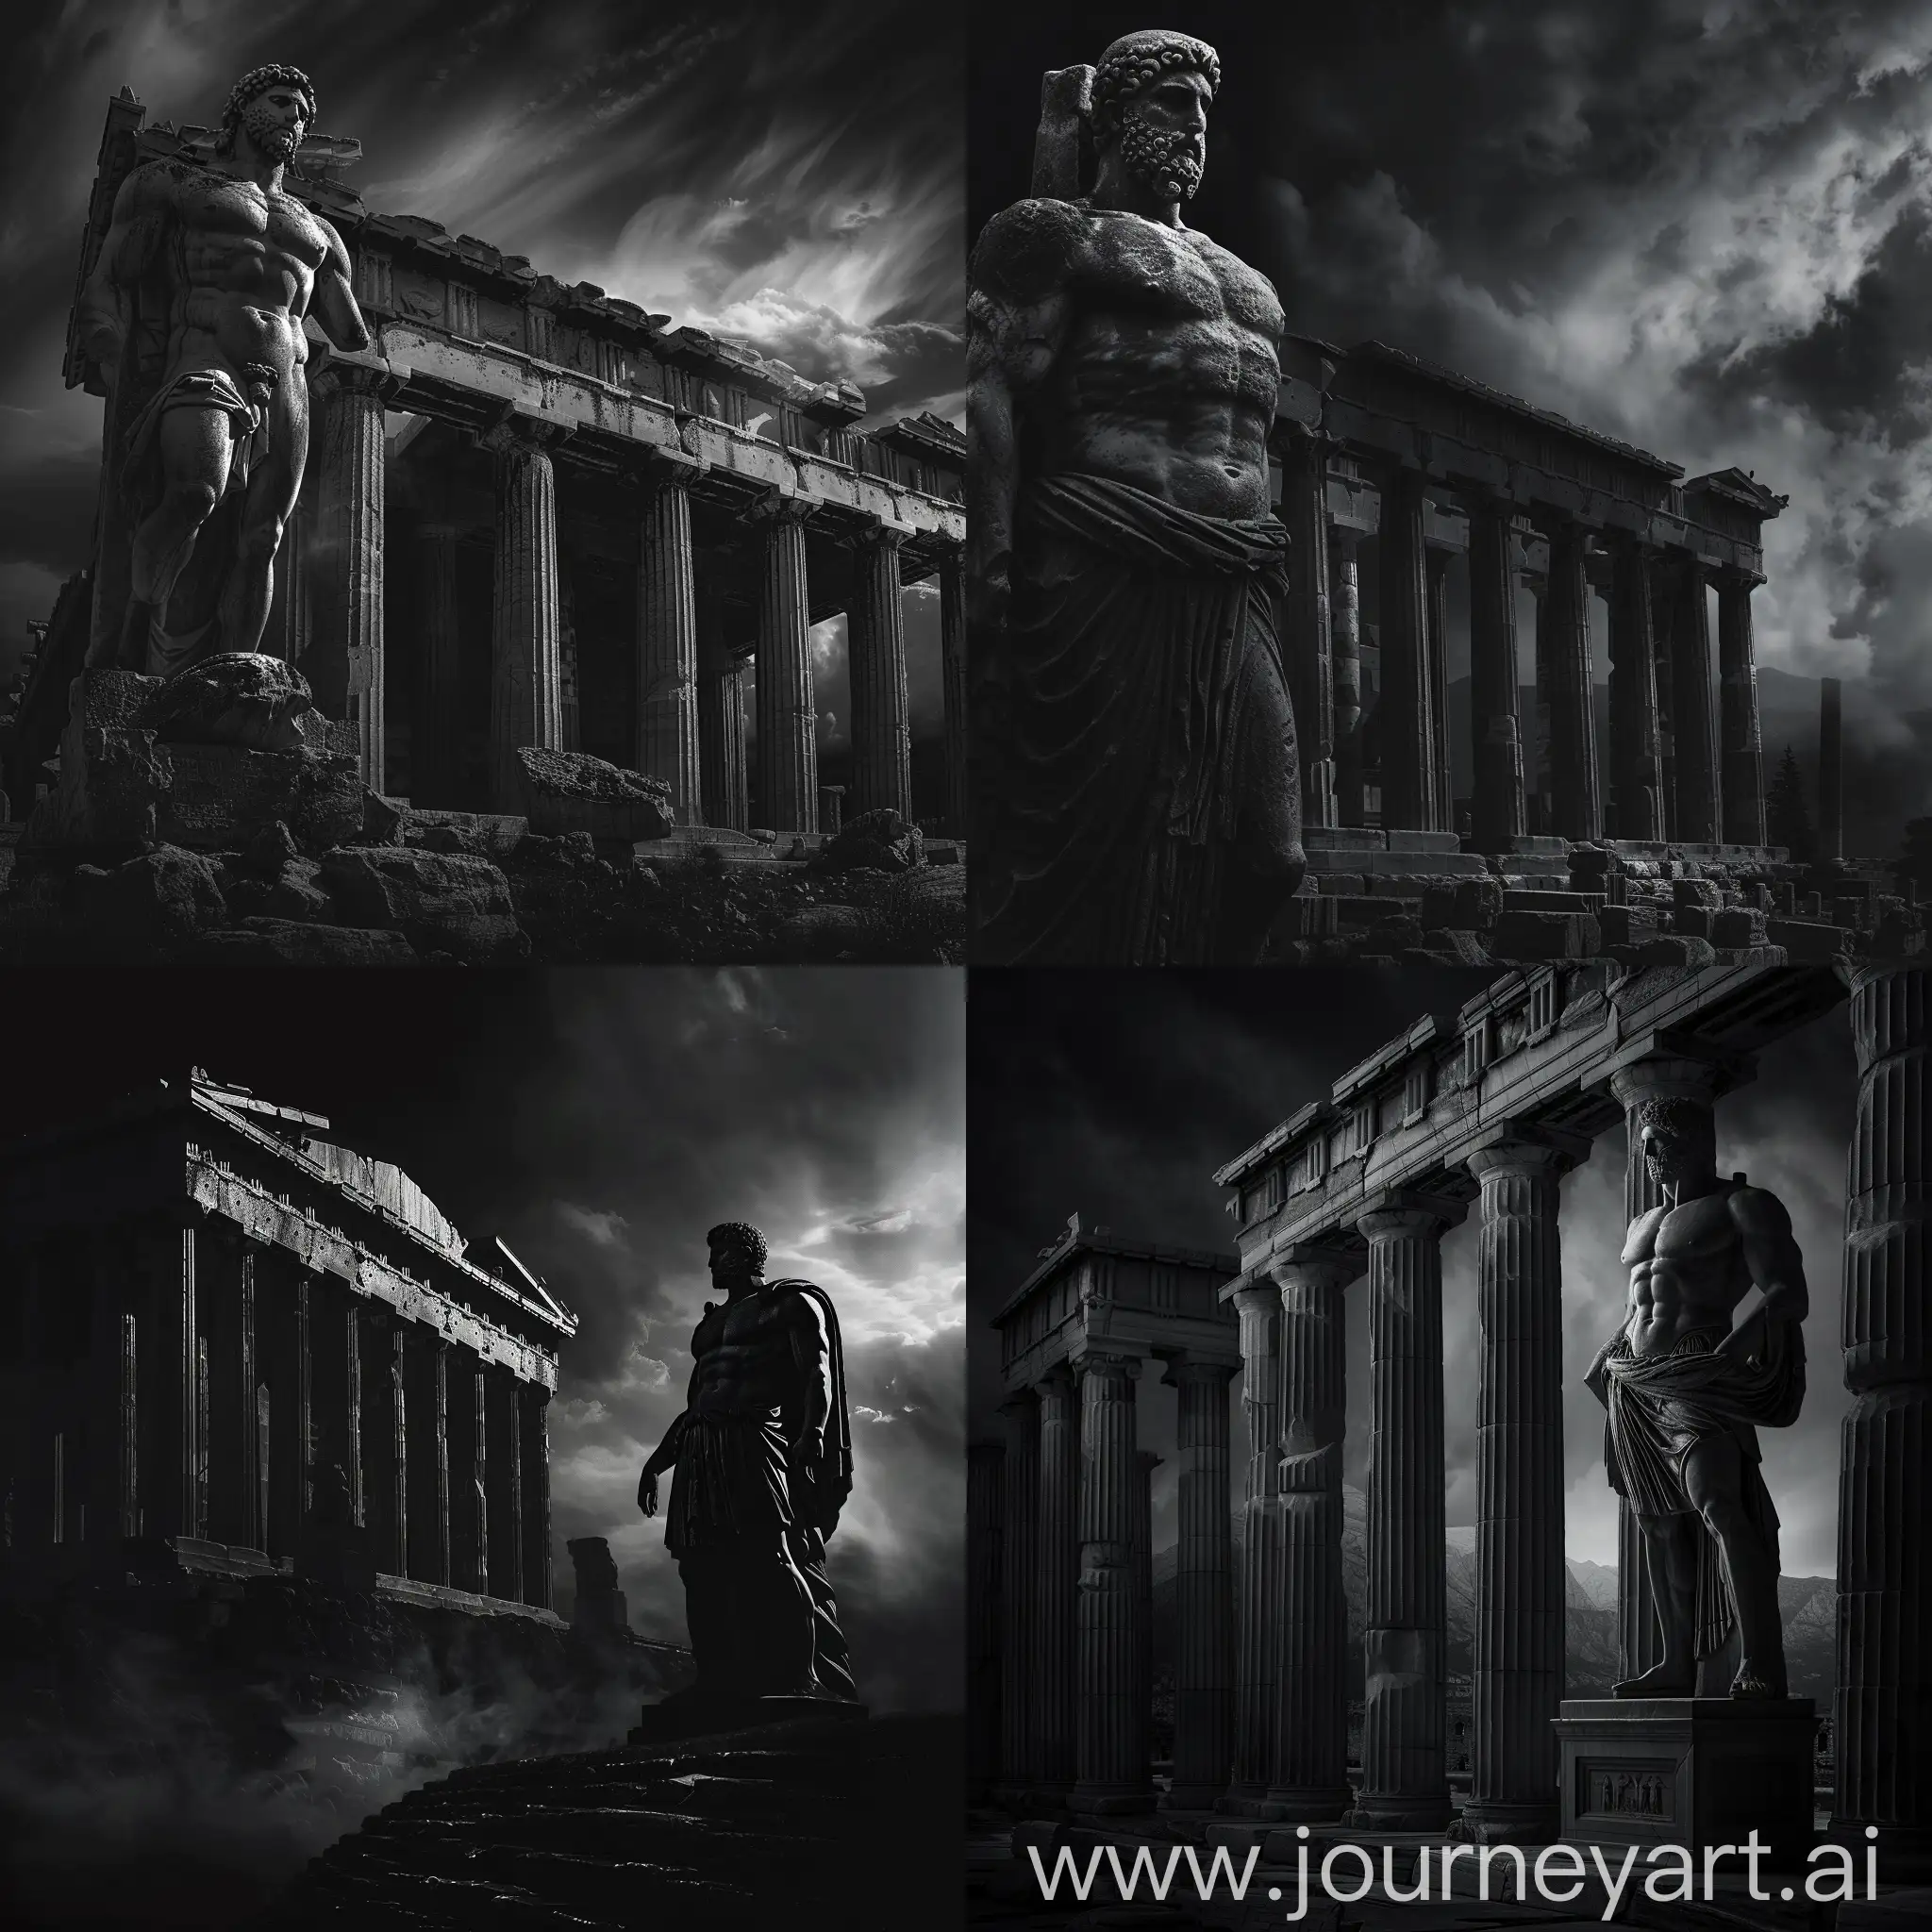 "A dark landscape image of an ancient greek society deeply connected to stoicism, black and white, ancient greek architecture, include one single big statue of a stereotypical strong greek man